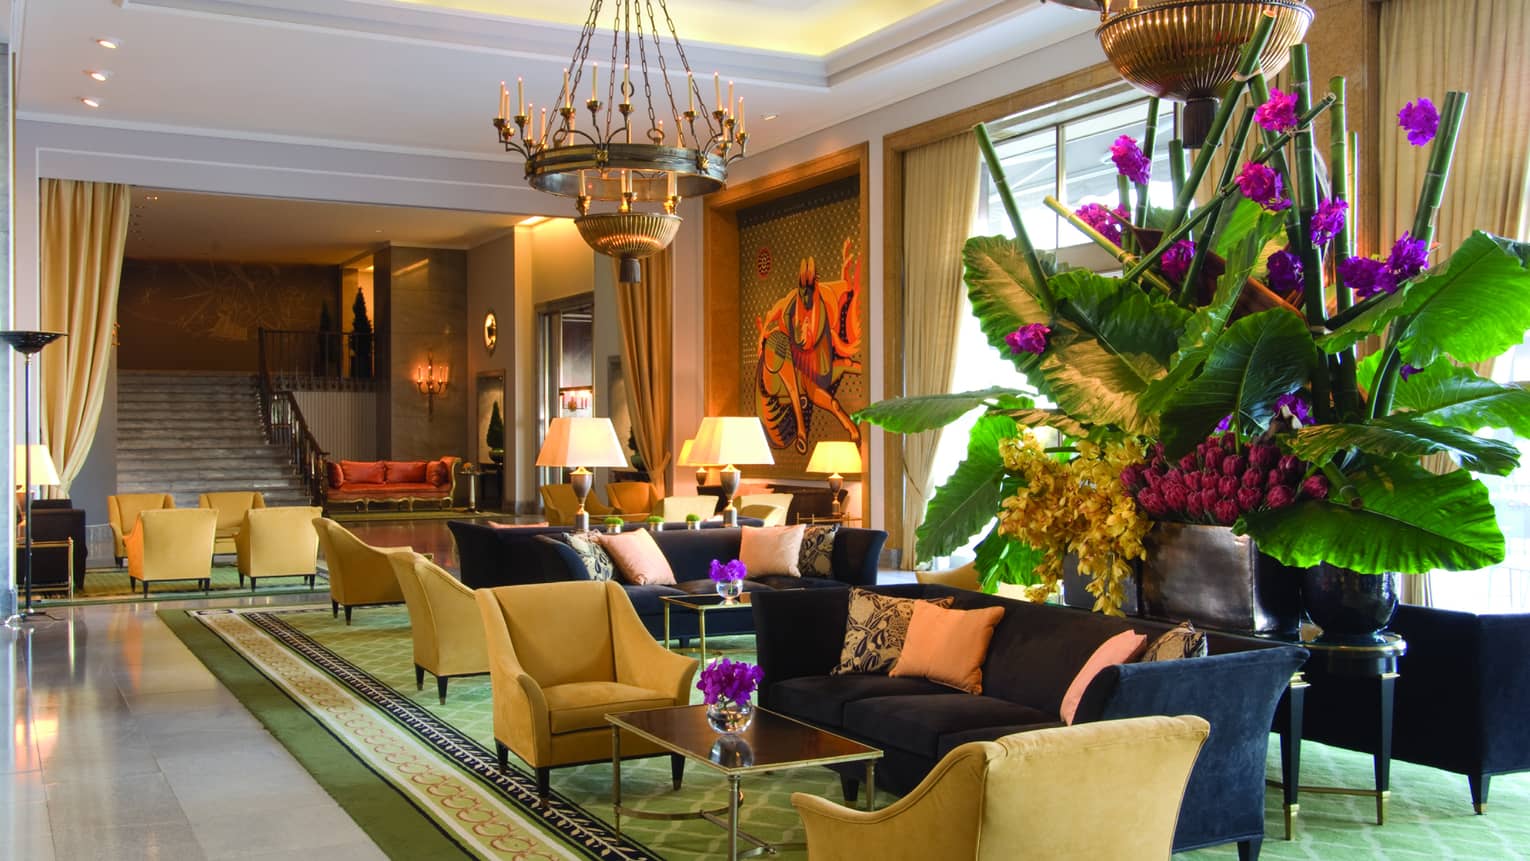 Sunny hotel lobby with blue sofas, yellow armchairs, large tropical plant with purple flowers